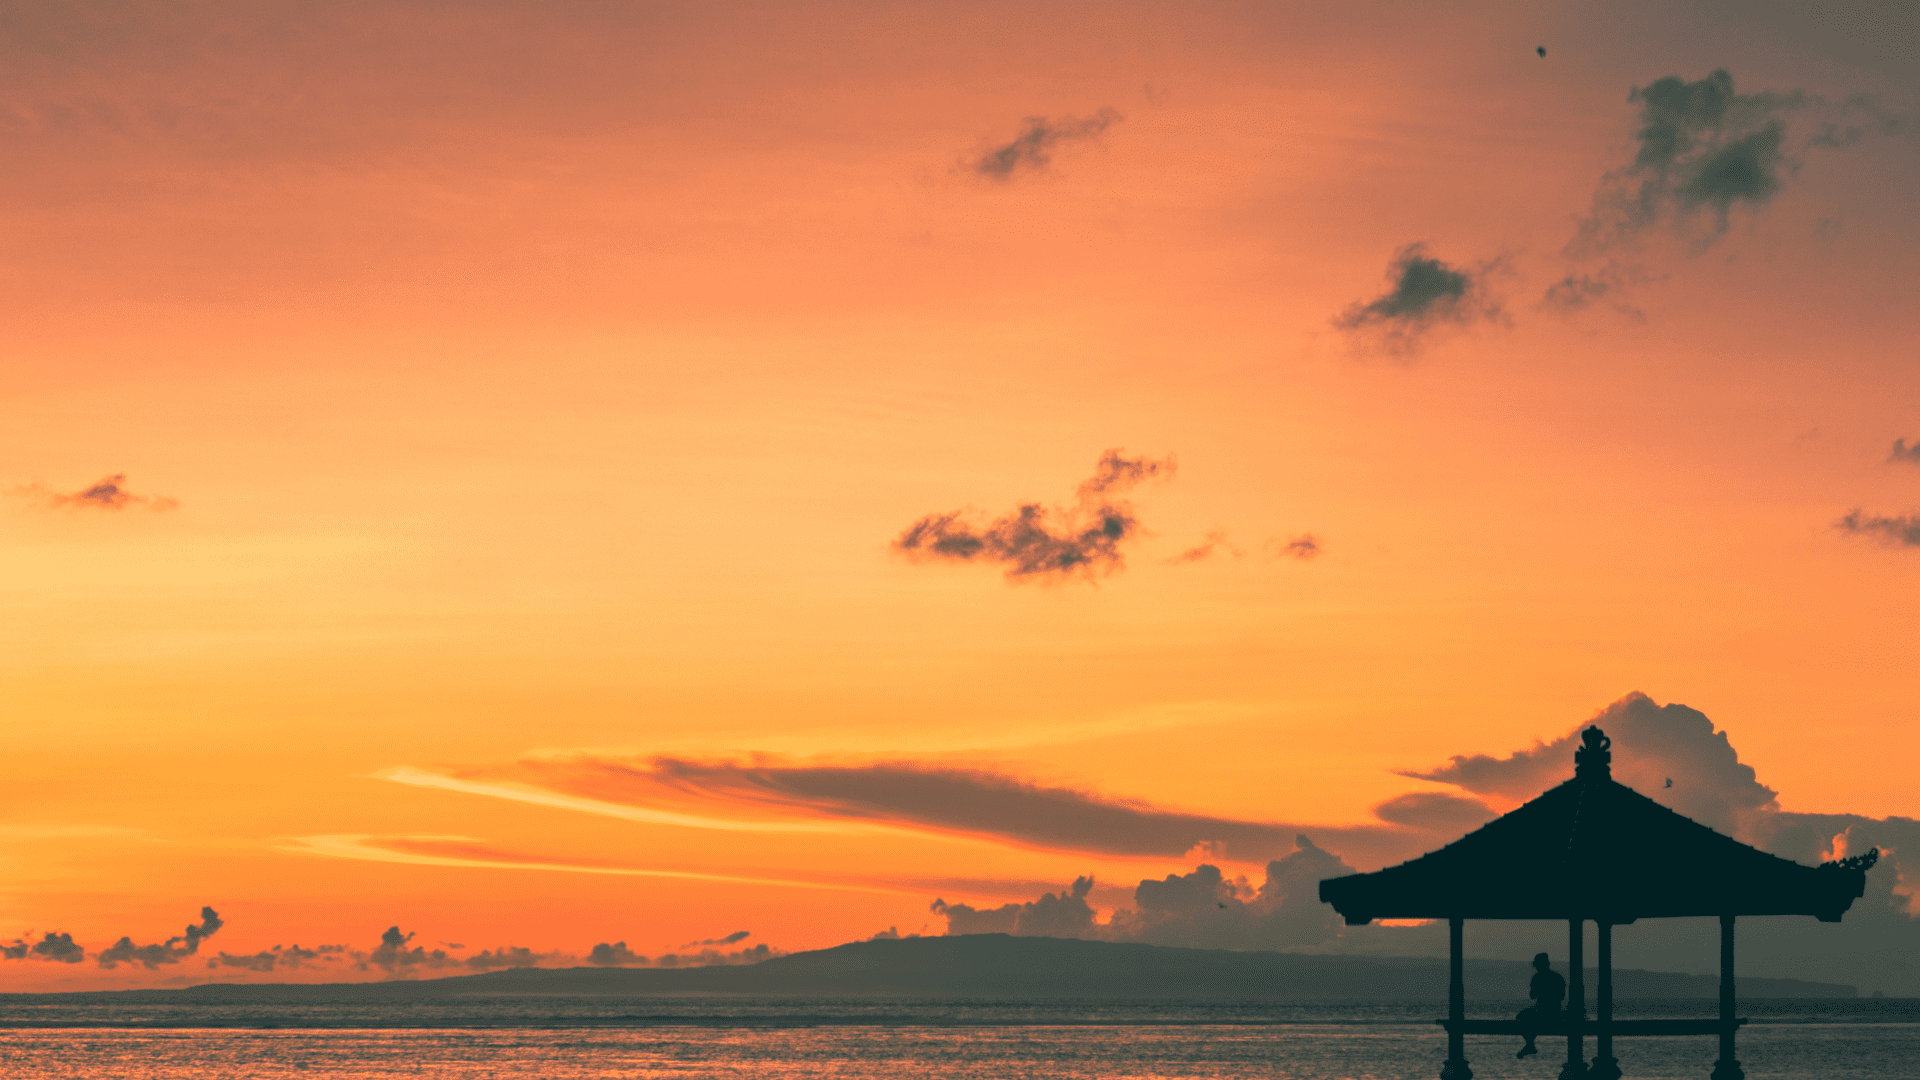 Top 10 Things To Do In Bali